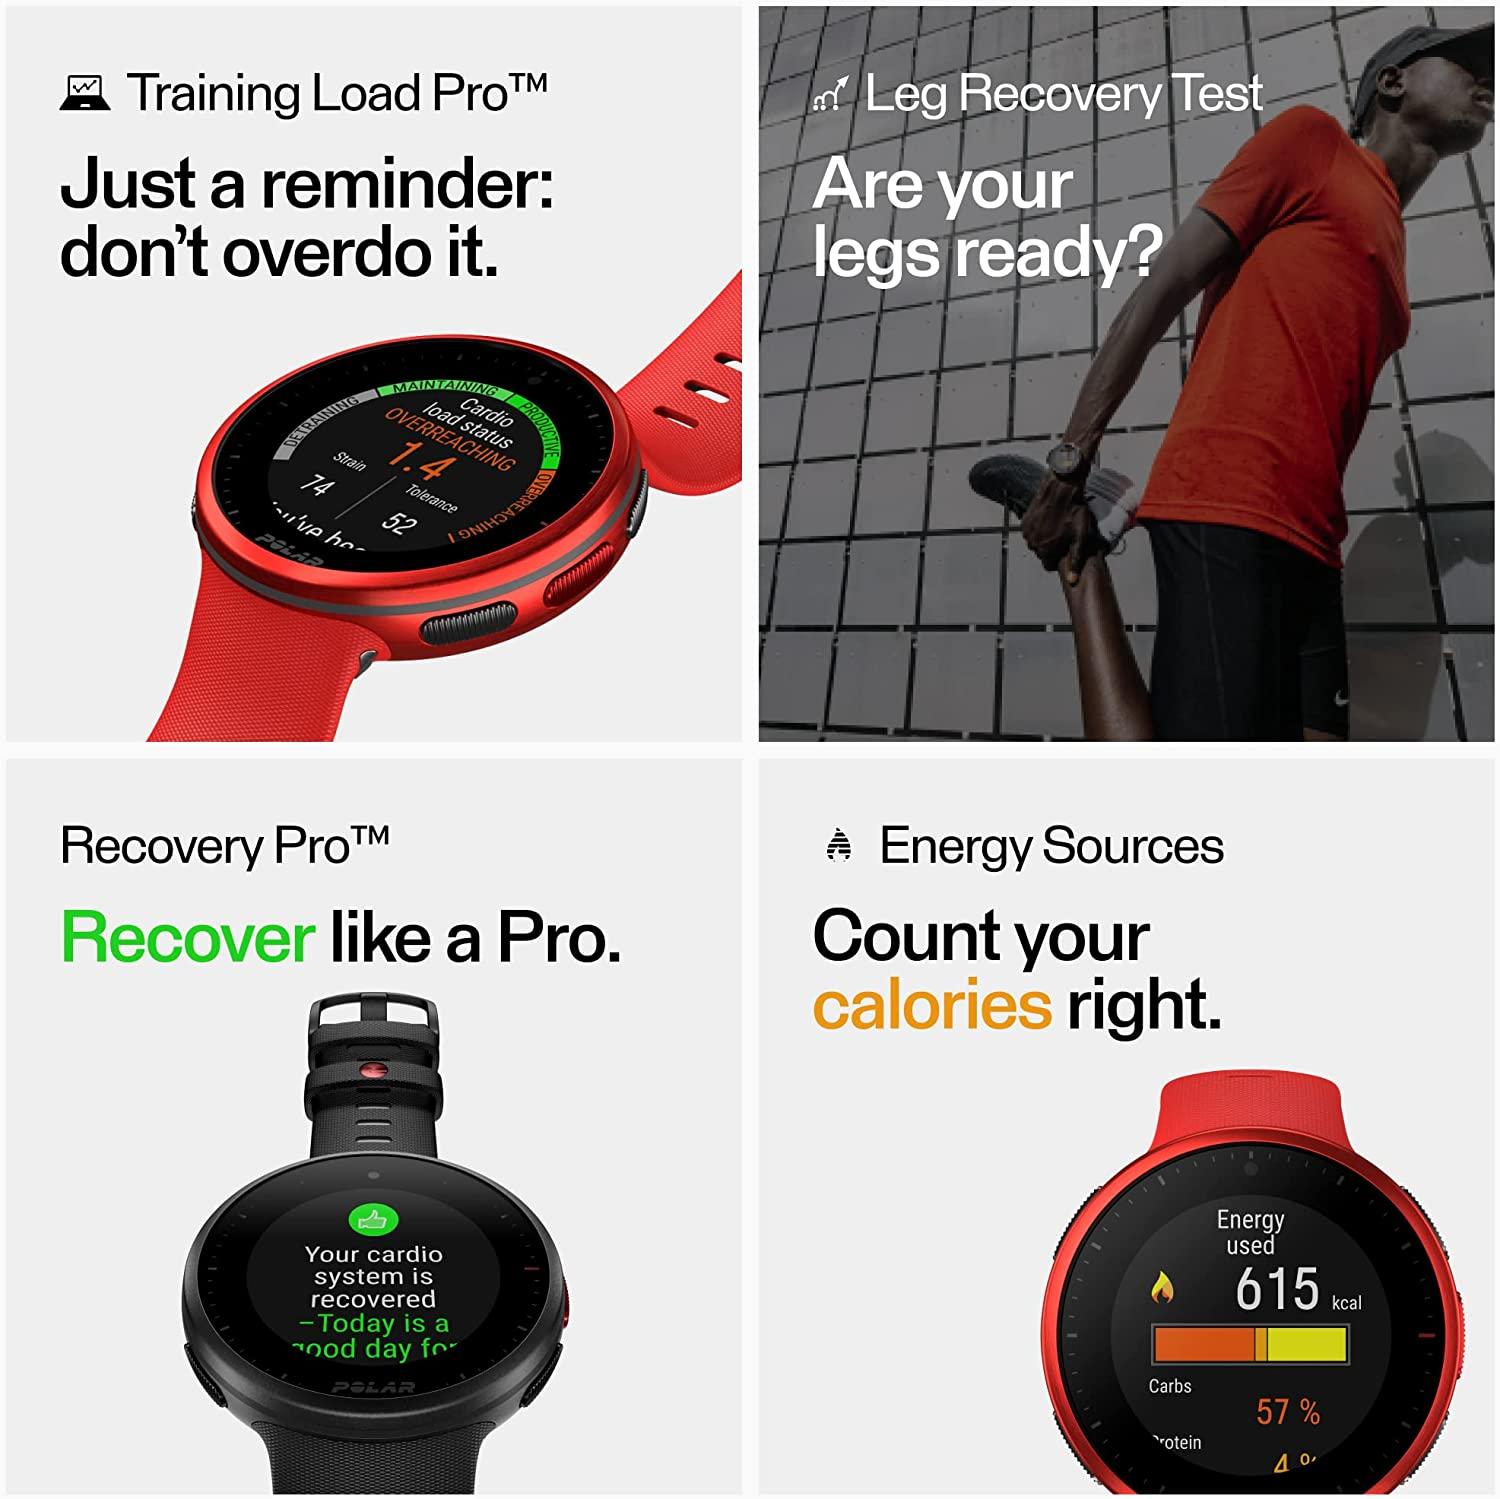 POLAR Vantage V2 - Premium Multisport Smartwatch with GPS, Wrist-Based HR  Measurement for All Sports - Music Control, Weather, Phone Notifications  comes with Polar H10 Heart Rate Sensor 